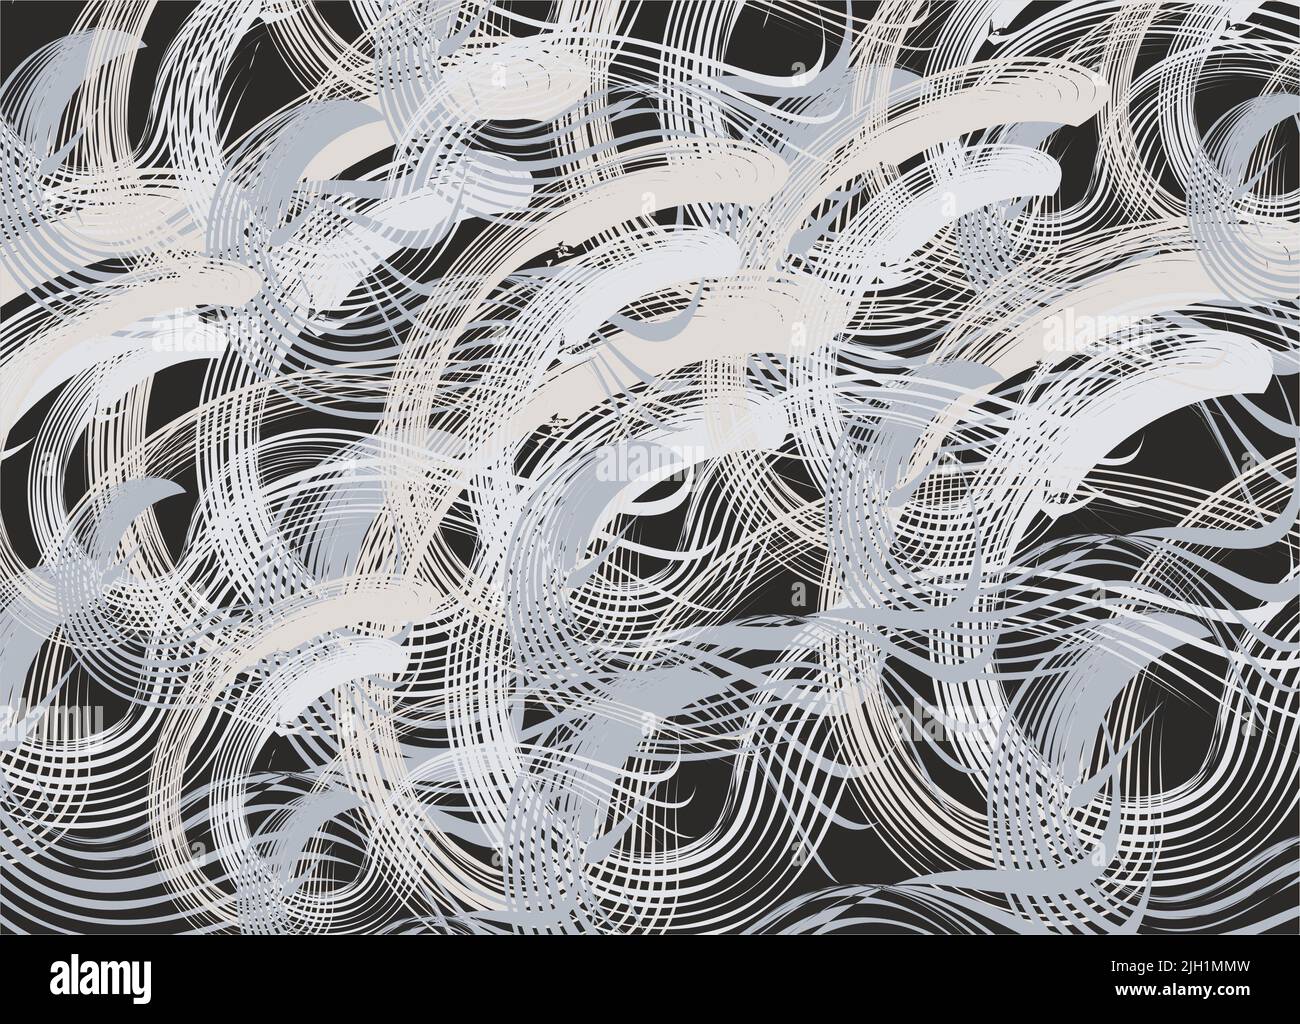 Abstract background - wavy lines on black. Spiral lines in gray tonality with a metallic tint for backgrounds, textures, fabric, prints, scenery Stock Photo